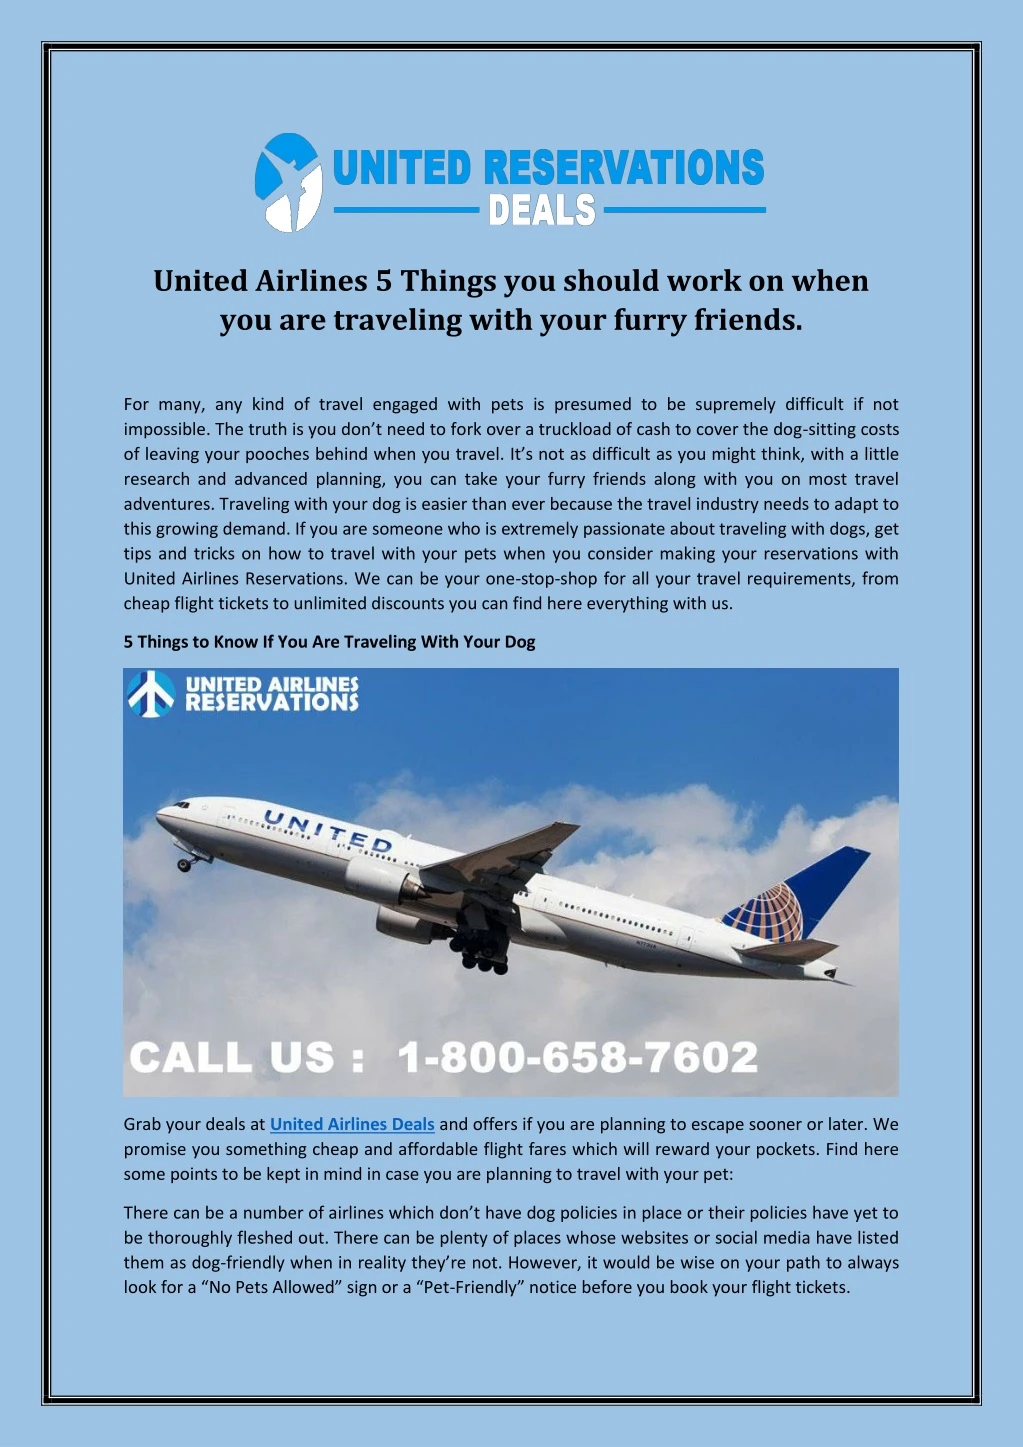 united airlines 5 things you should work on when